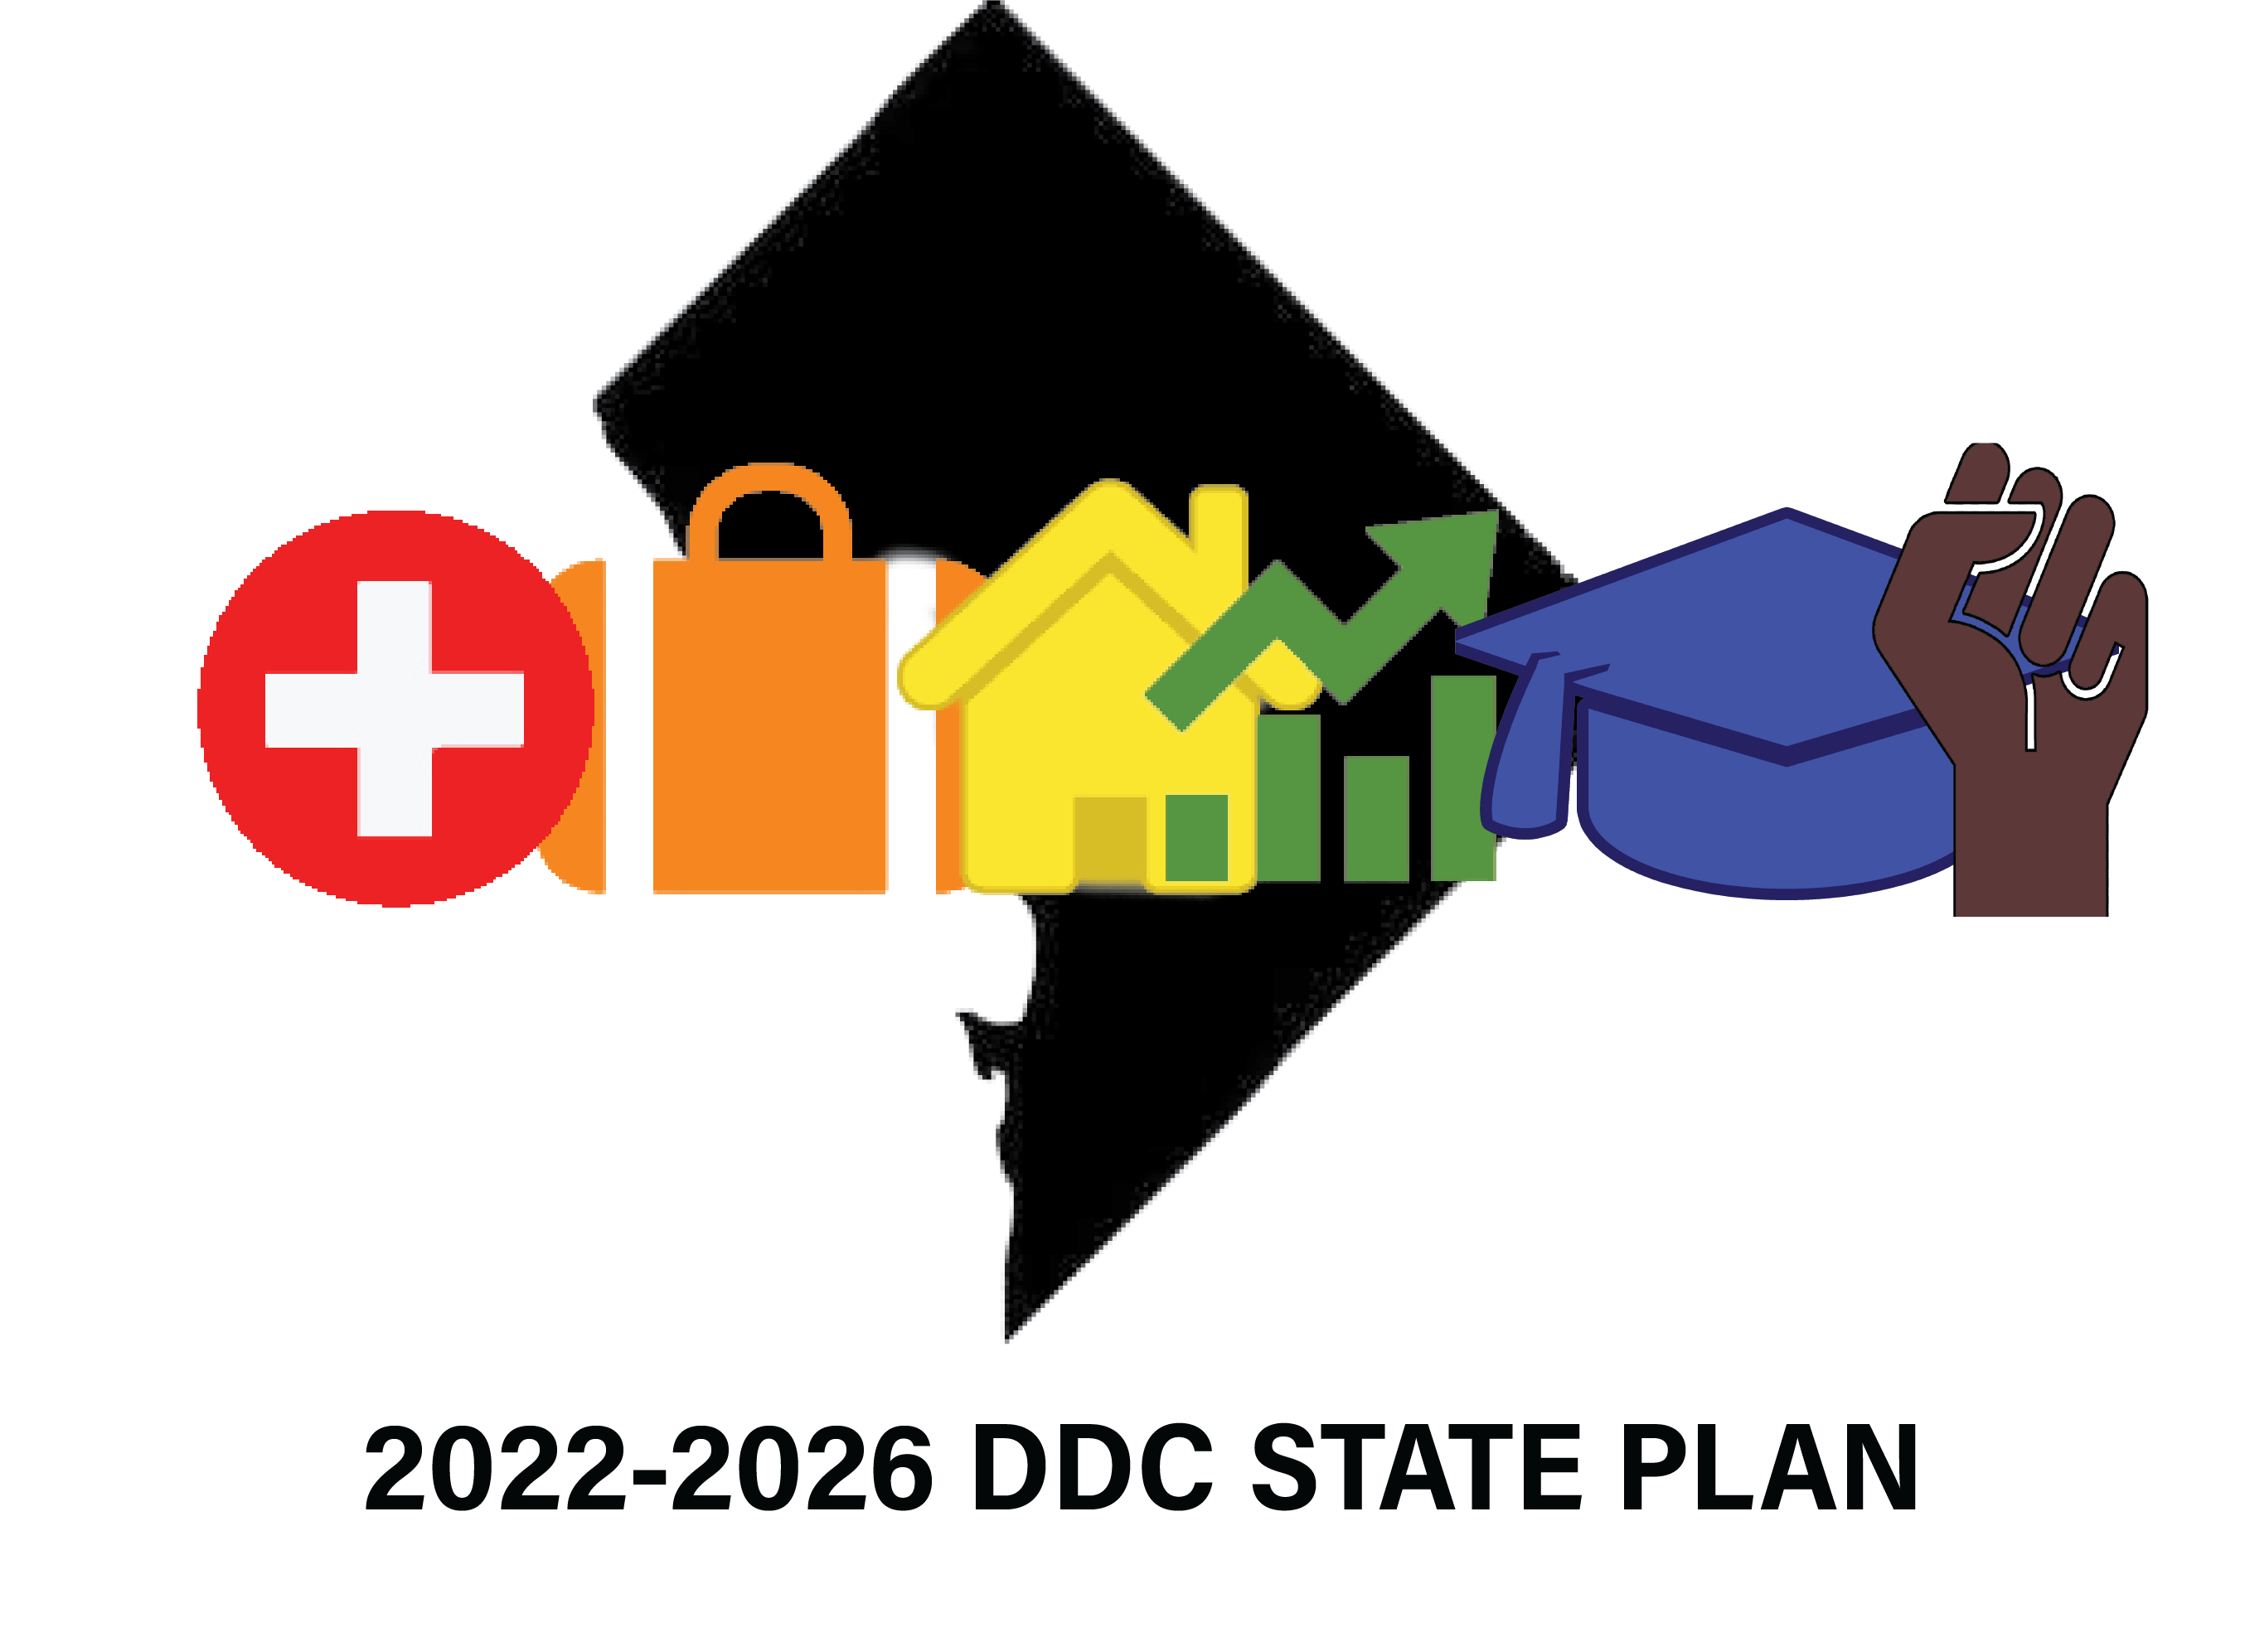 The DC State 2022-2026 State Plan Logo: A black outline of DC with a red circle with the white cross (Health), a orange suitcase (Employment), a yellow house (Housing), a green area with bars (Quality), a blue graduation cap (Education), and a brown fist pumping (Diversity). Below is text: 2022-2026 DDC STATE PLAN.